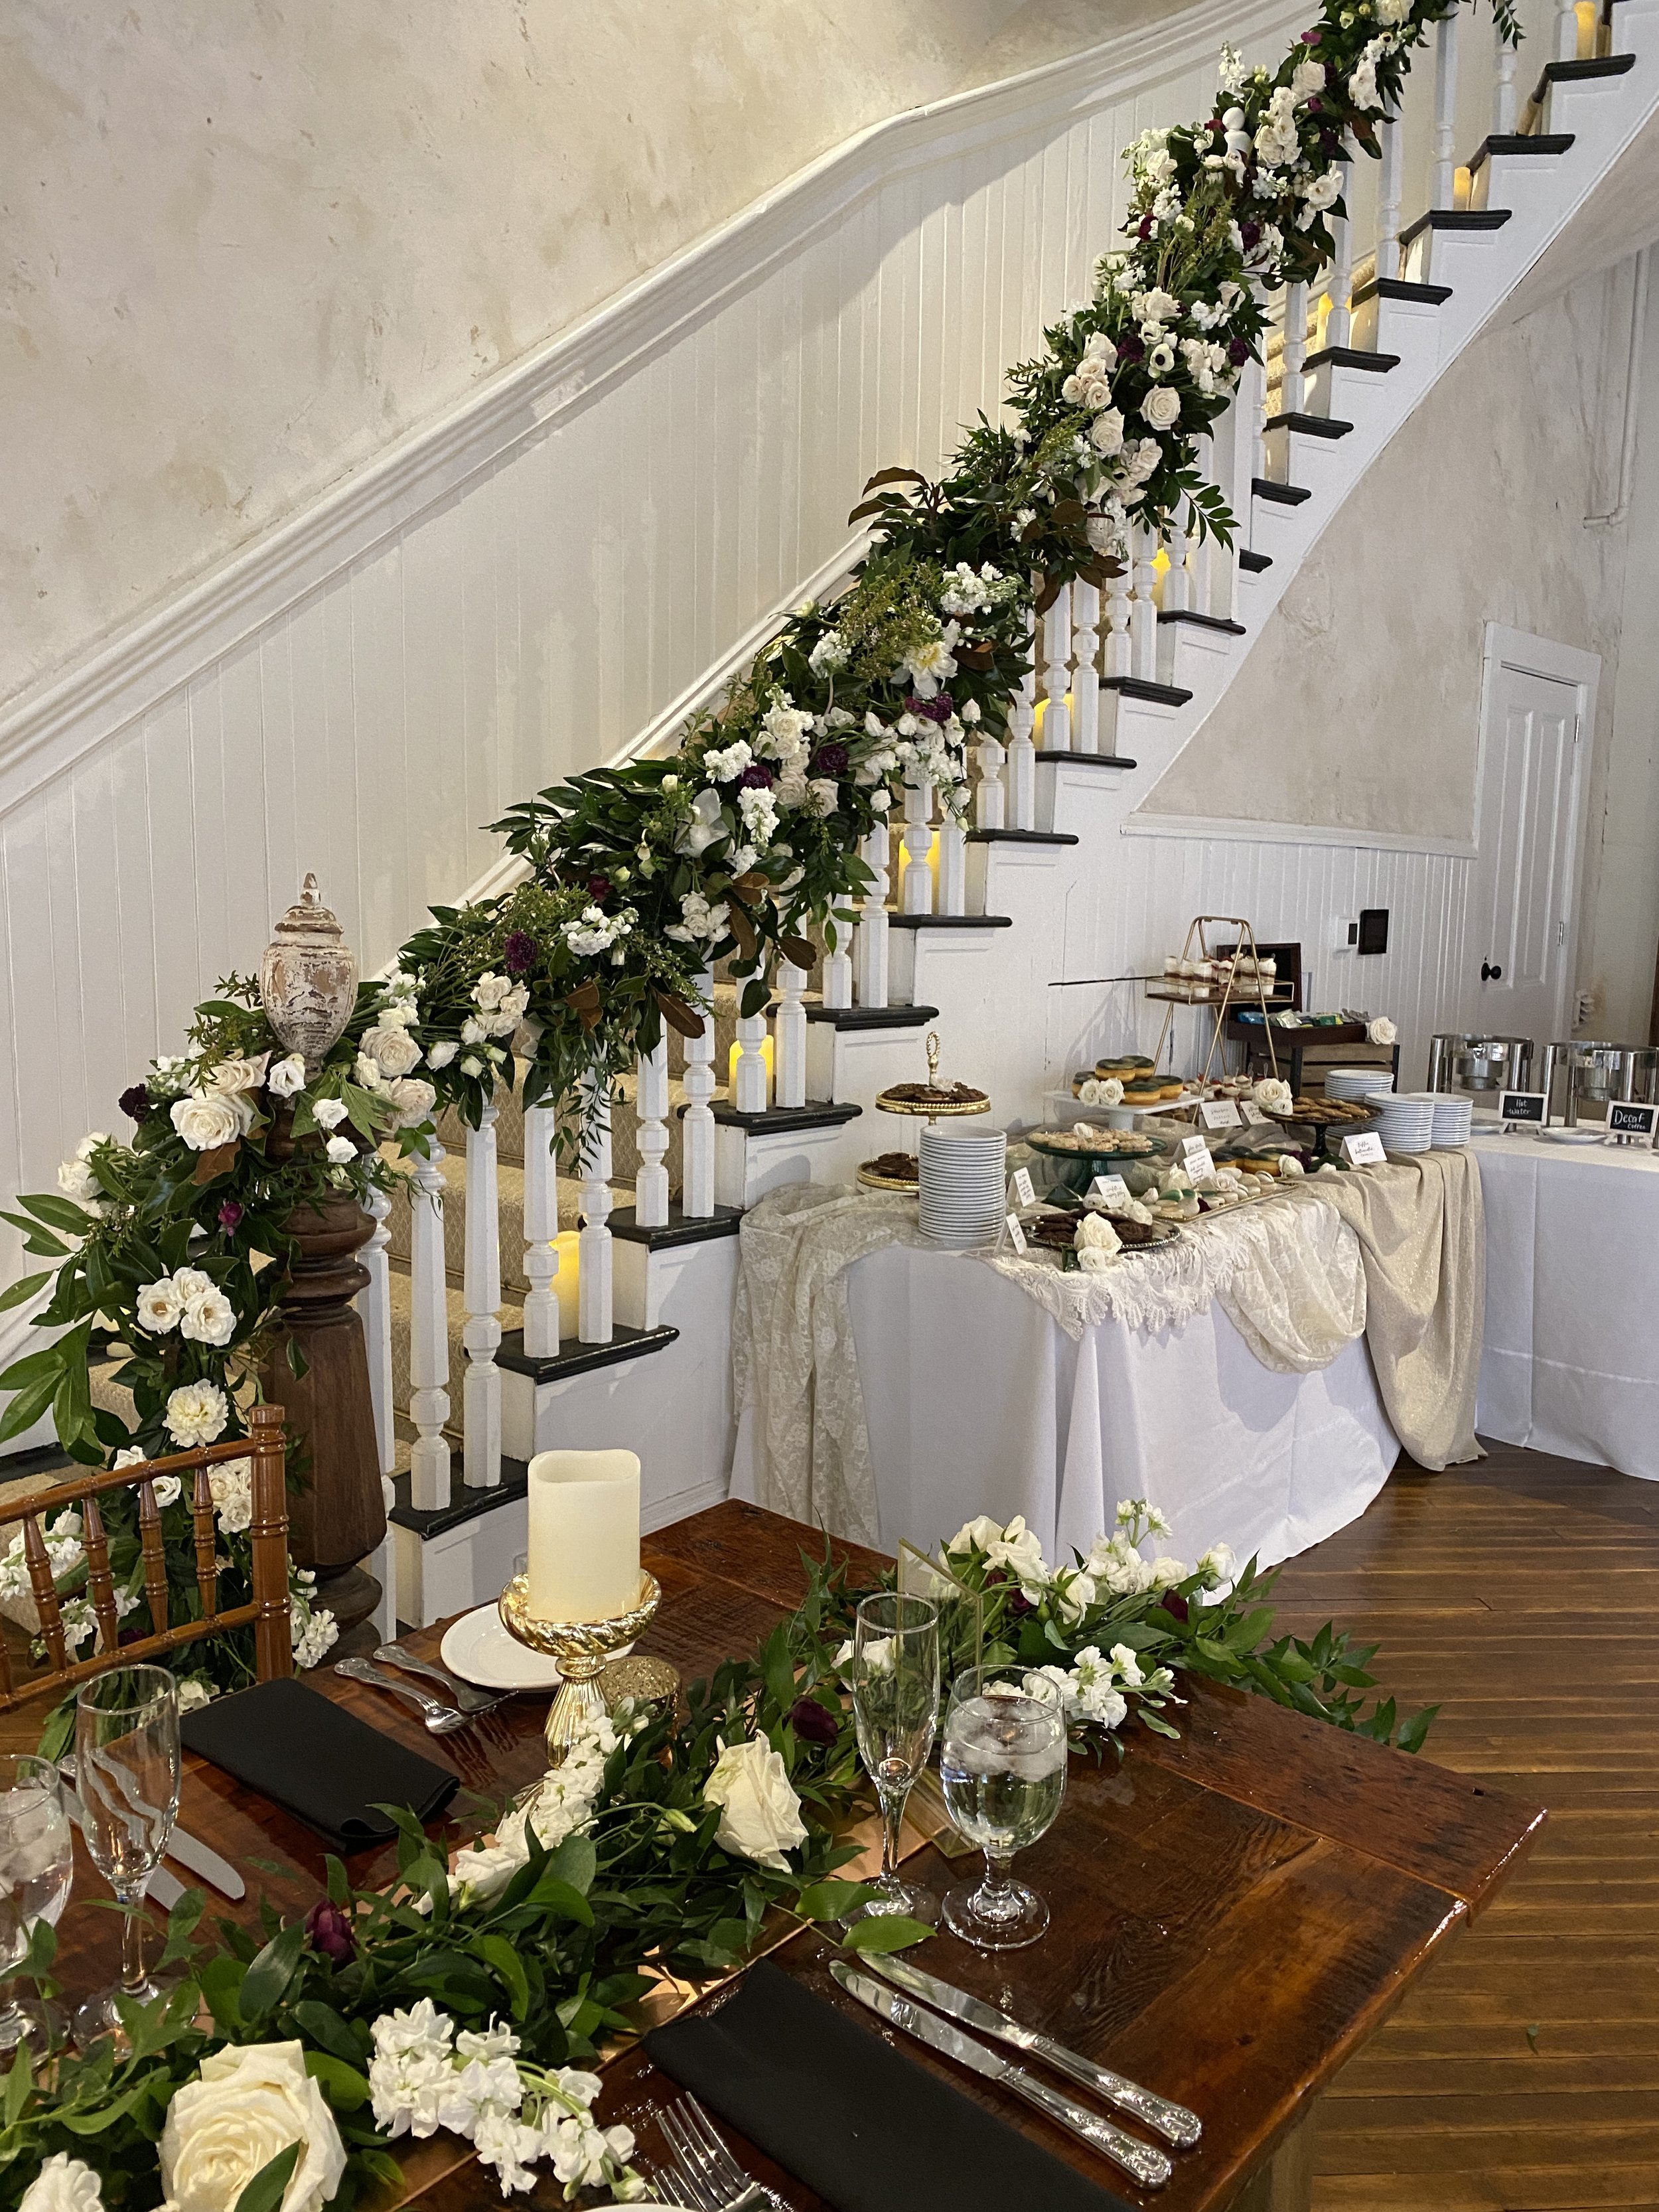 Grand staircase covered in flowers and dessert table